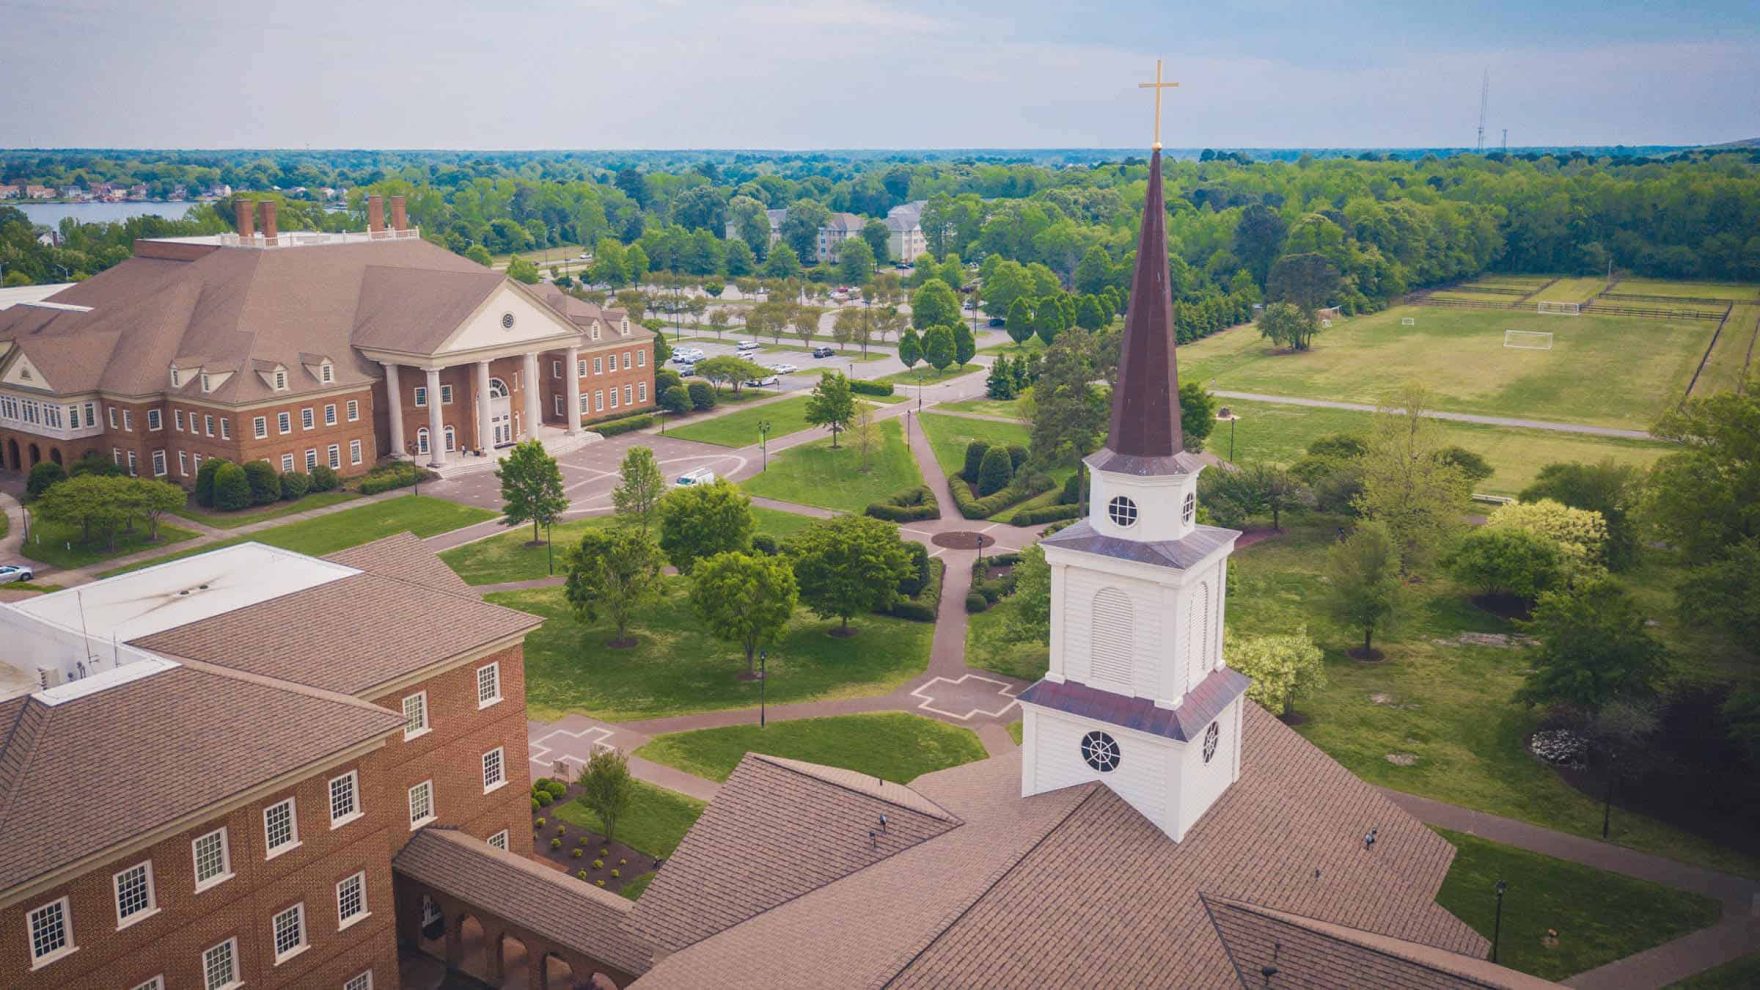 Regent University: Learn about the mentor relationship between Paul and Timothy.